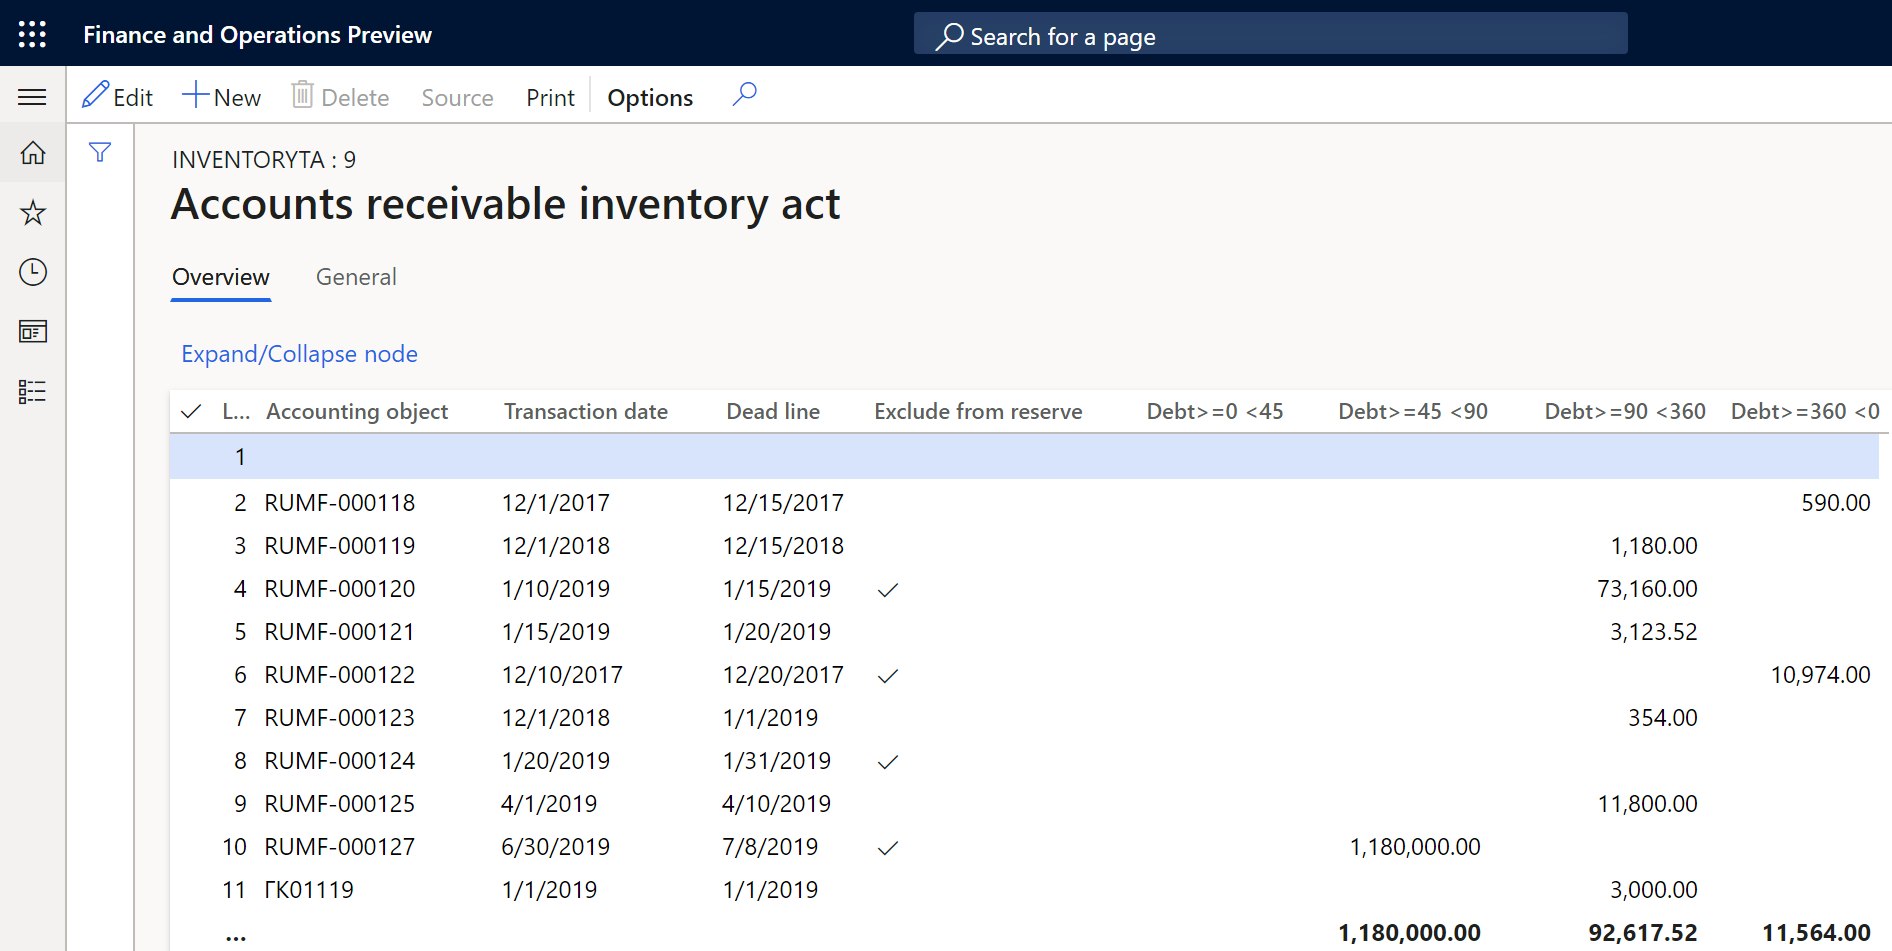 Example of the Accounts receivable inventory act page.